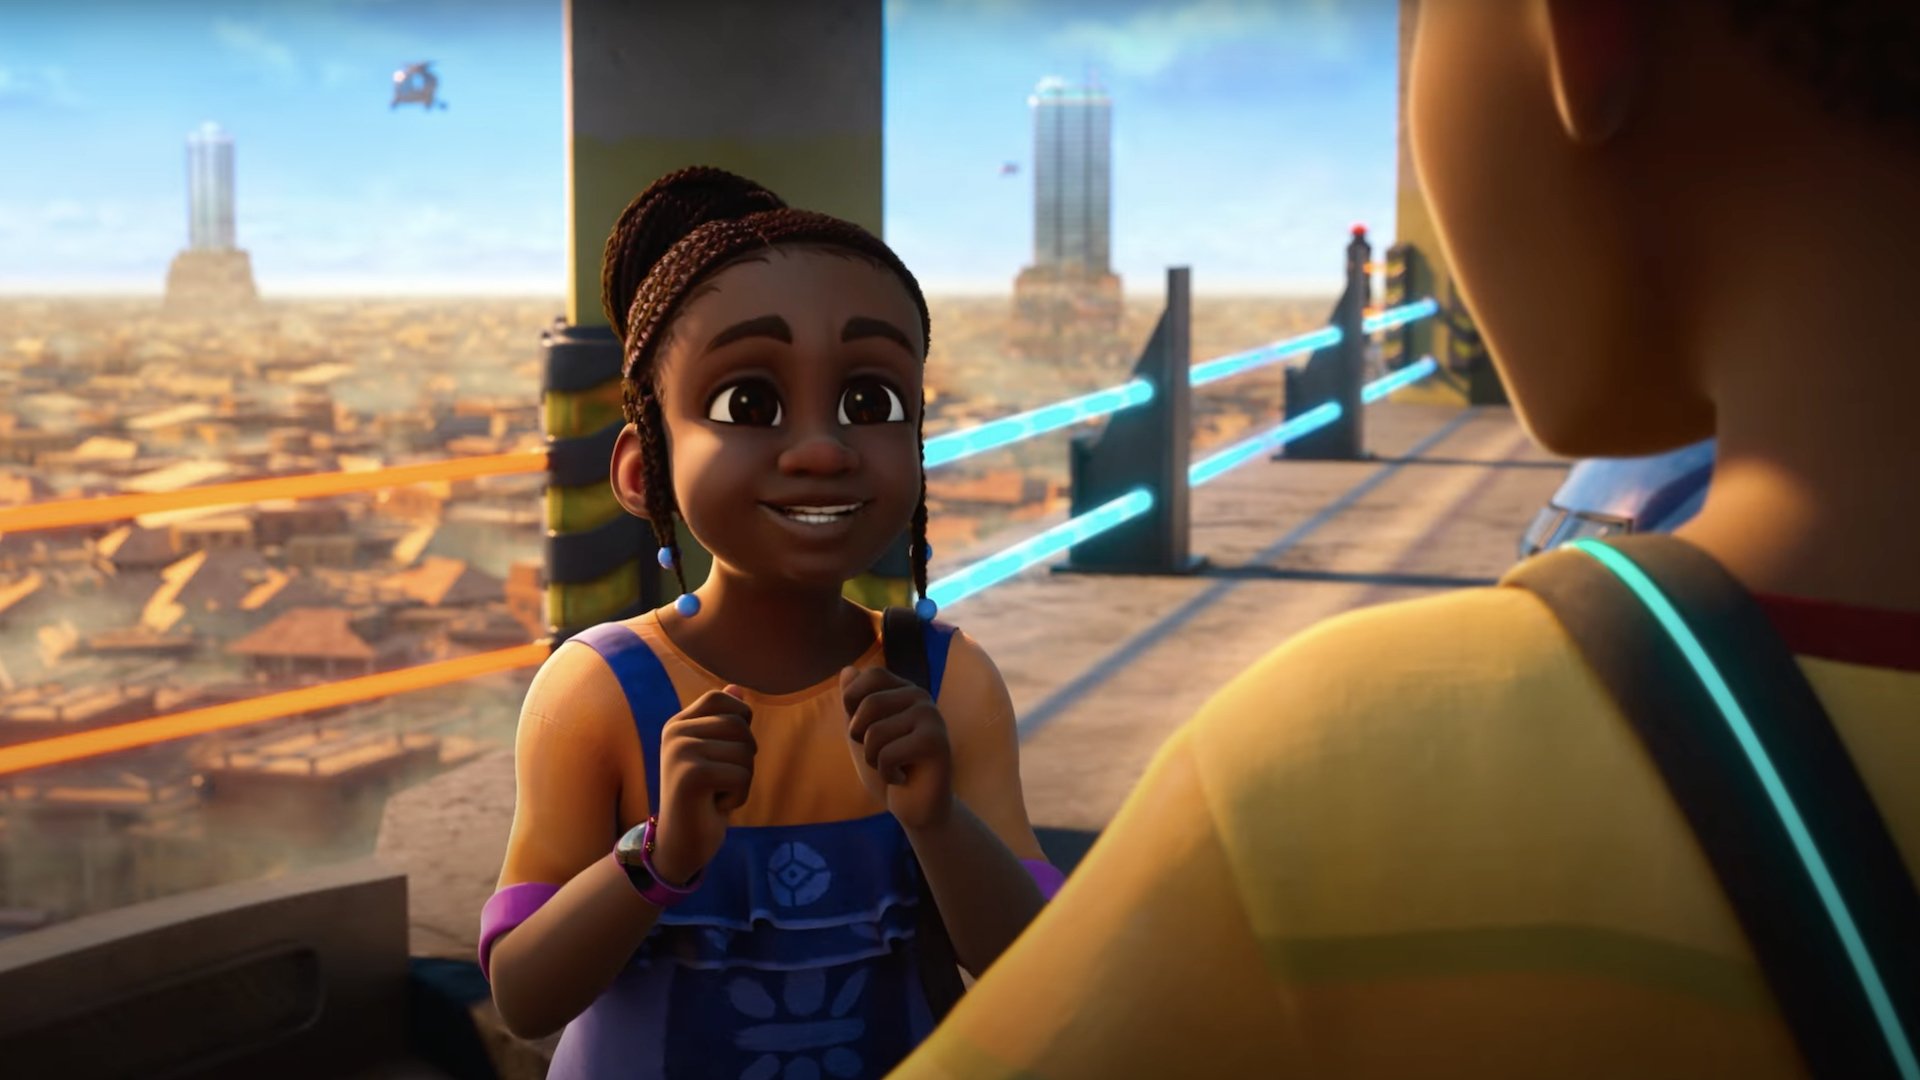 A girl in Lagos looks excited in the animated film 